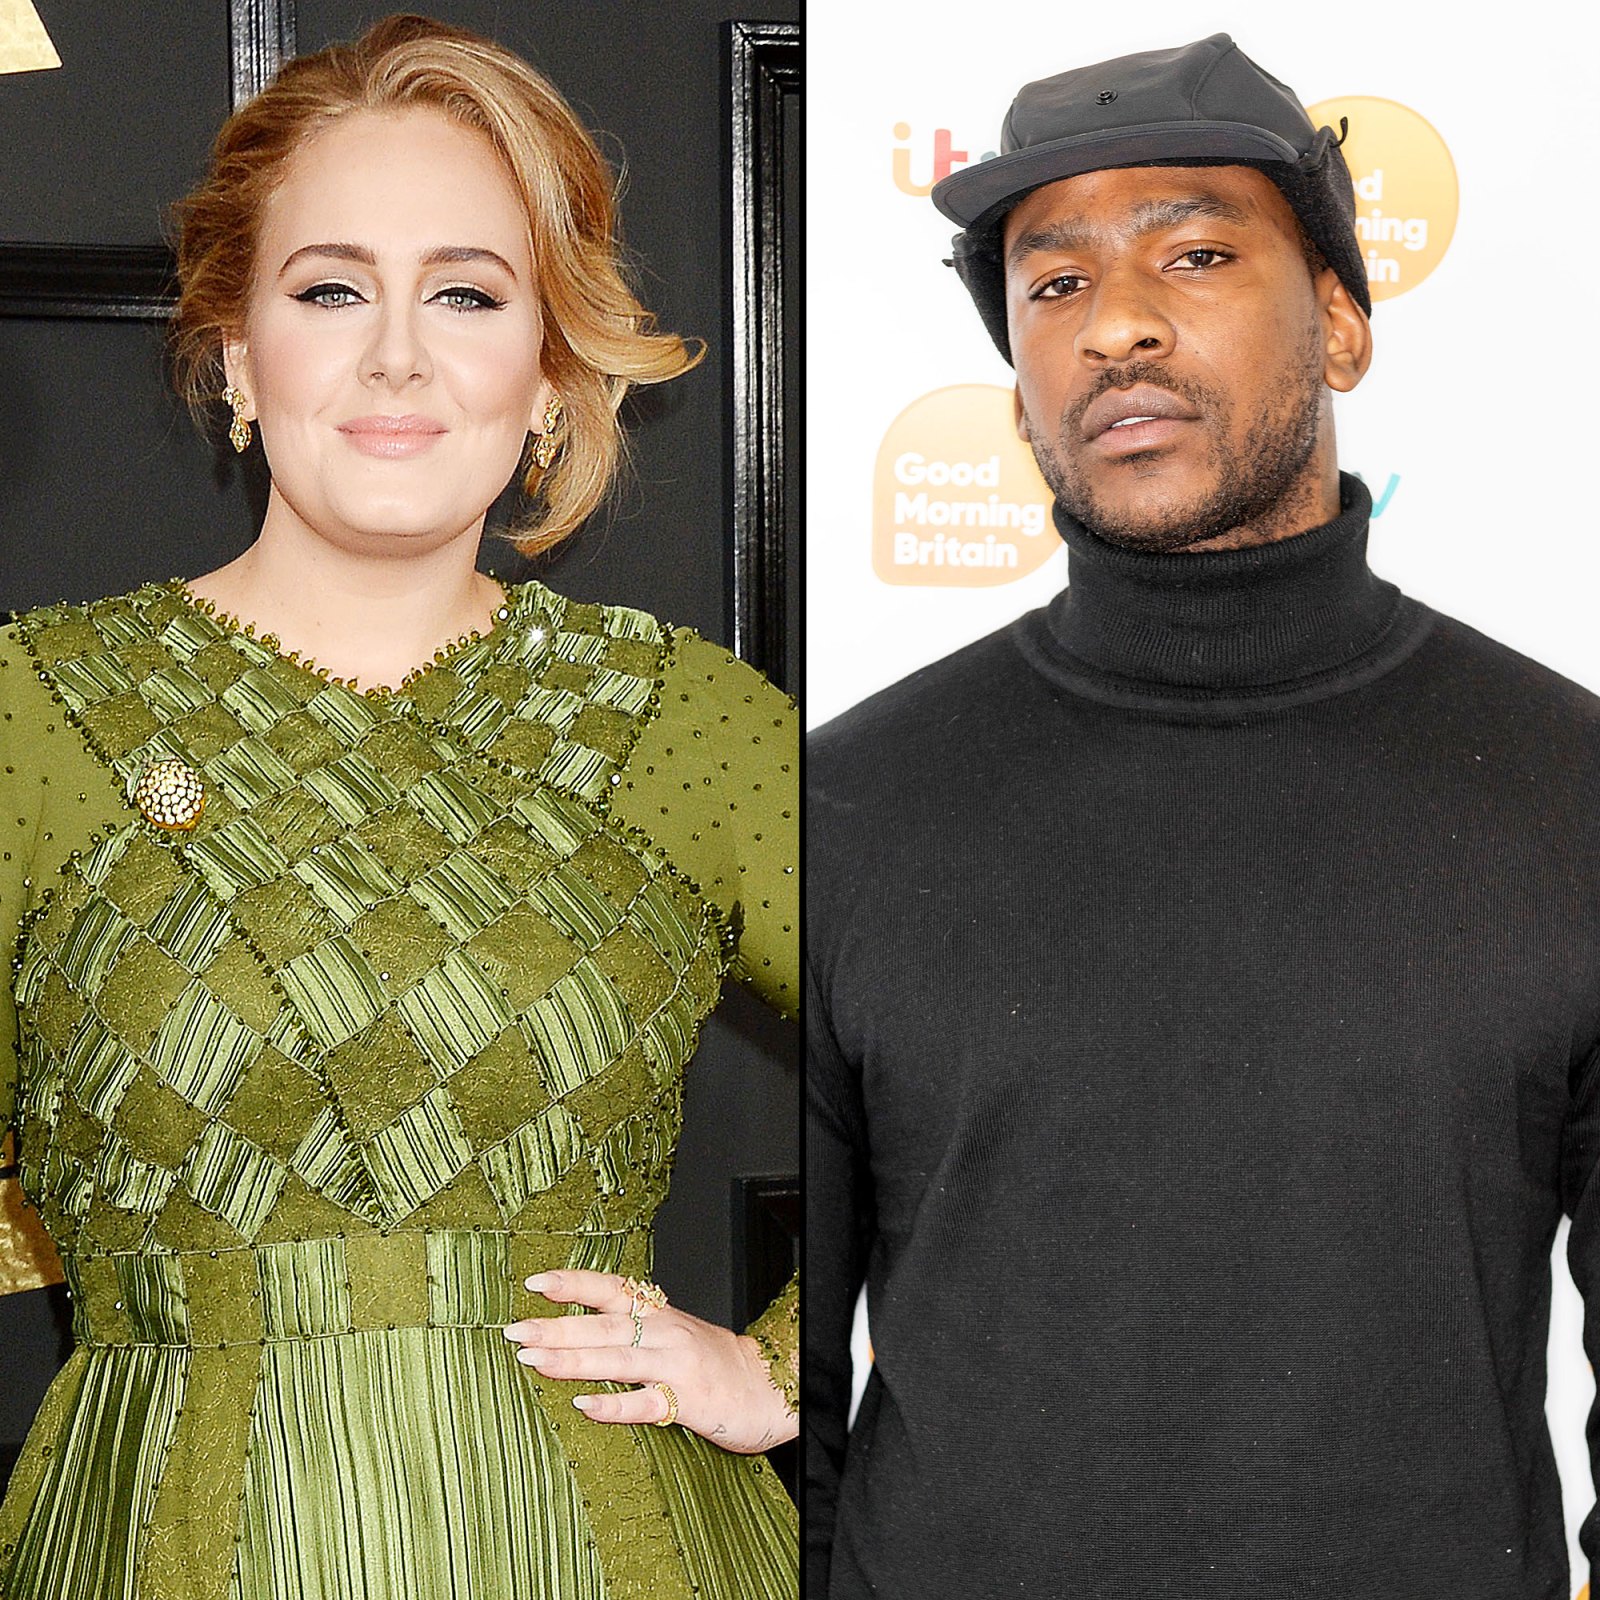 5 Things To Know About British Rapper Skepta Adele New Boyfriend